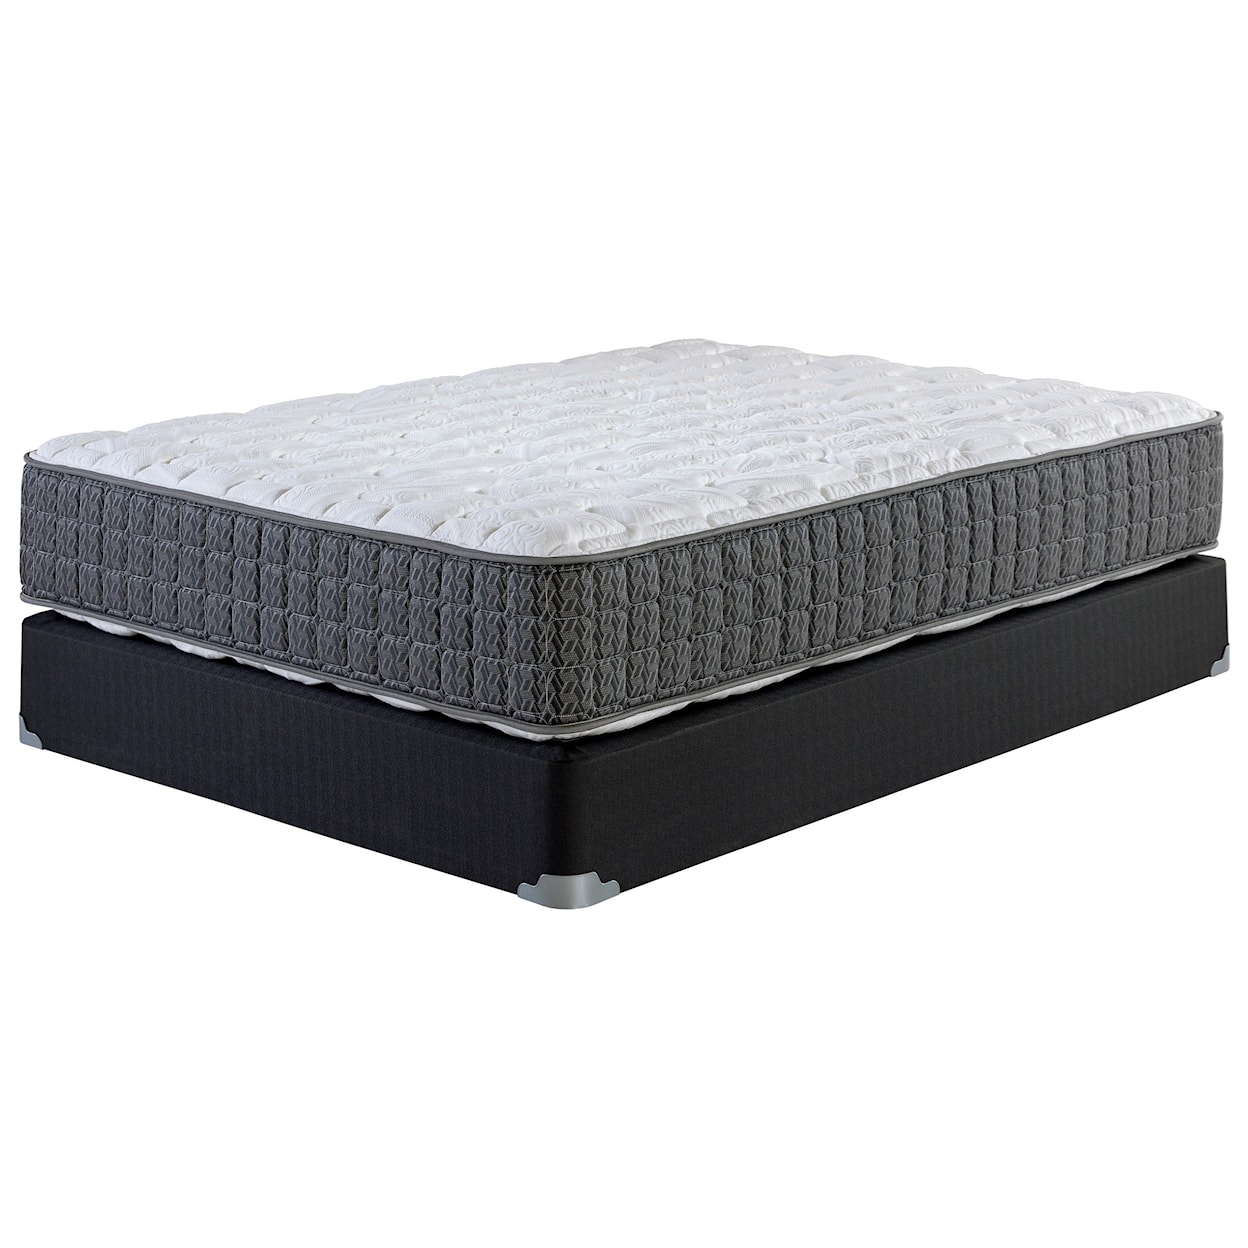 Corsicana Rossington Firm Twin Firm Two Sided Mattress Set